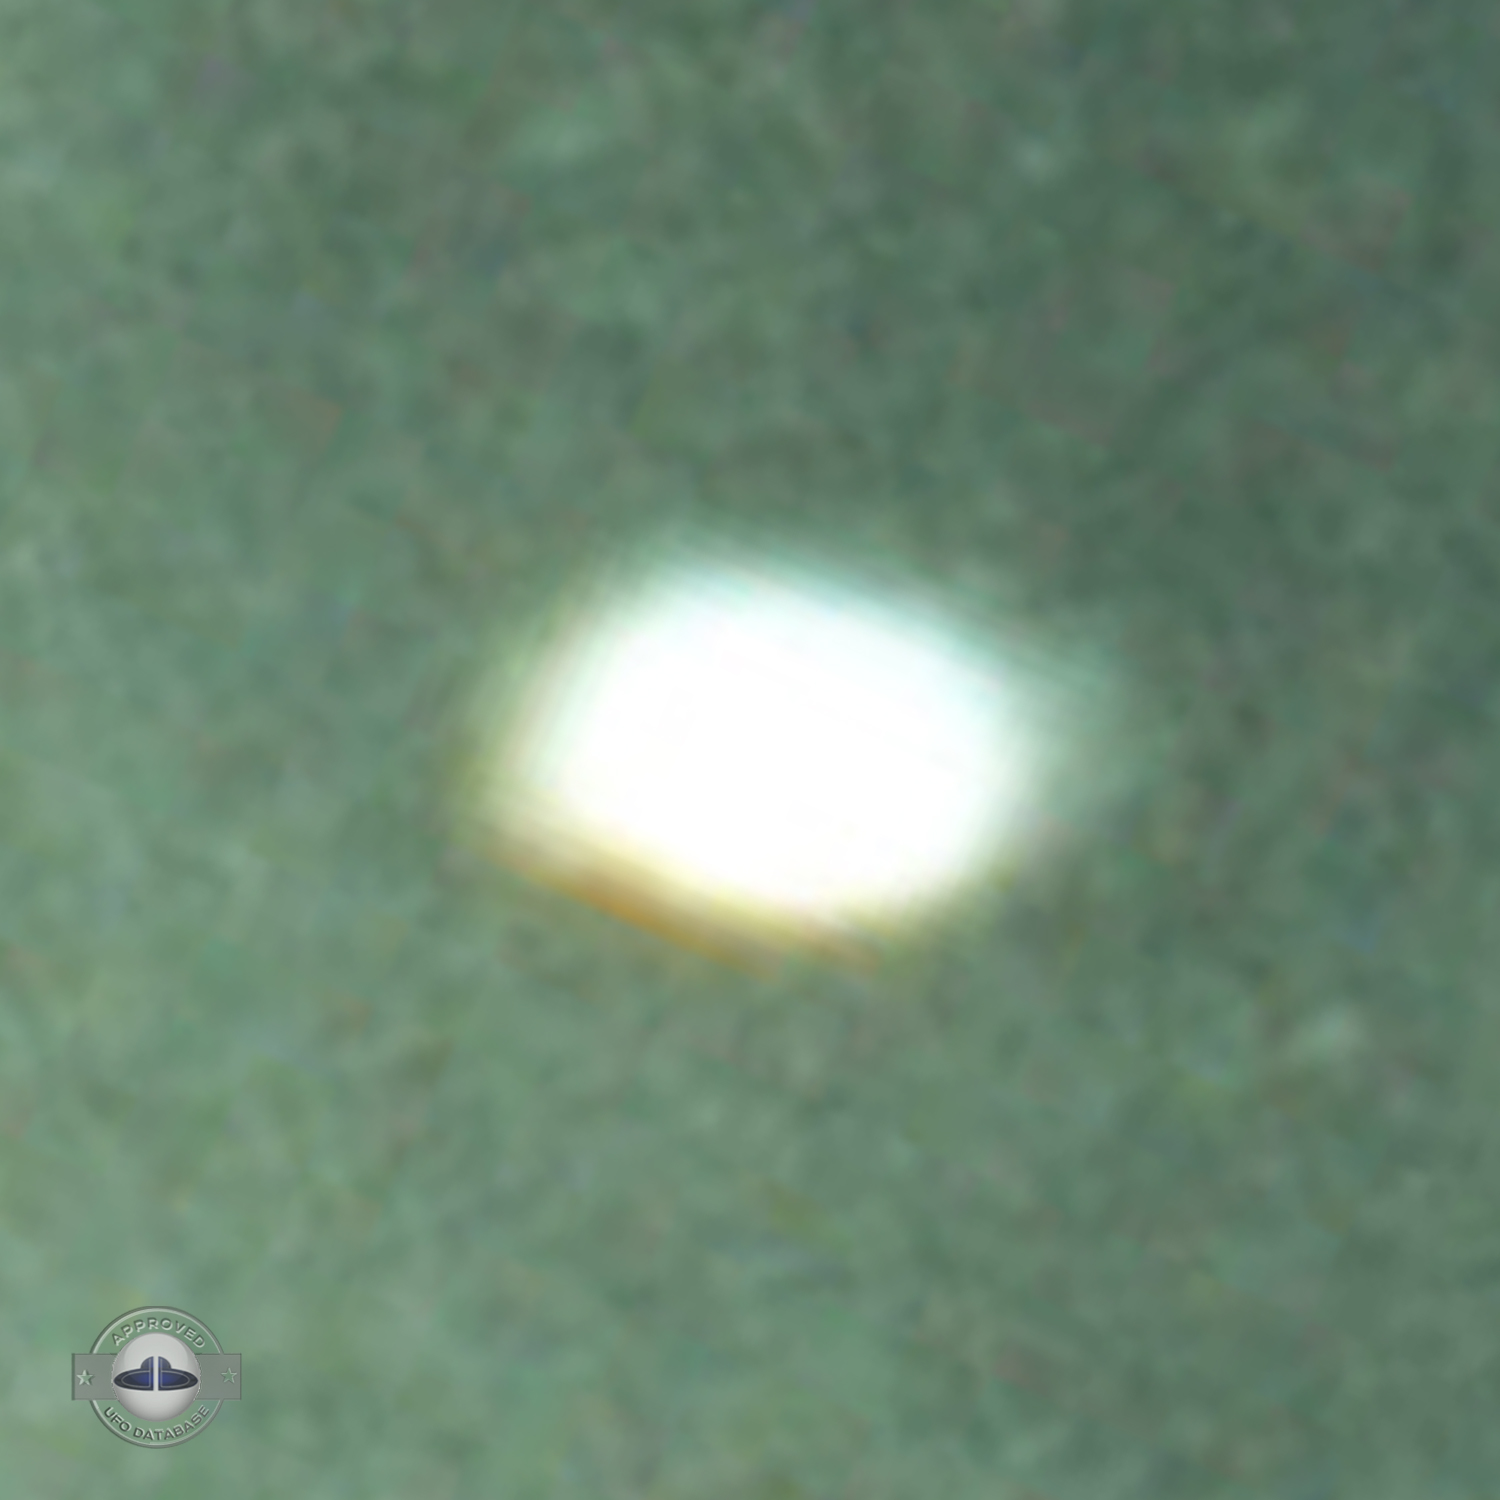 8 UFOs over Ashoka Ashram in Mehrauli India | 1964 | by Billy Meier UFO Picture #177-7